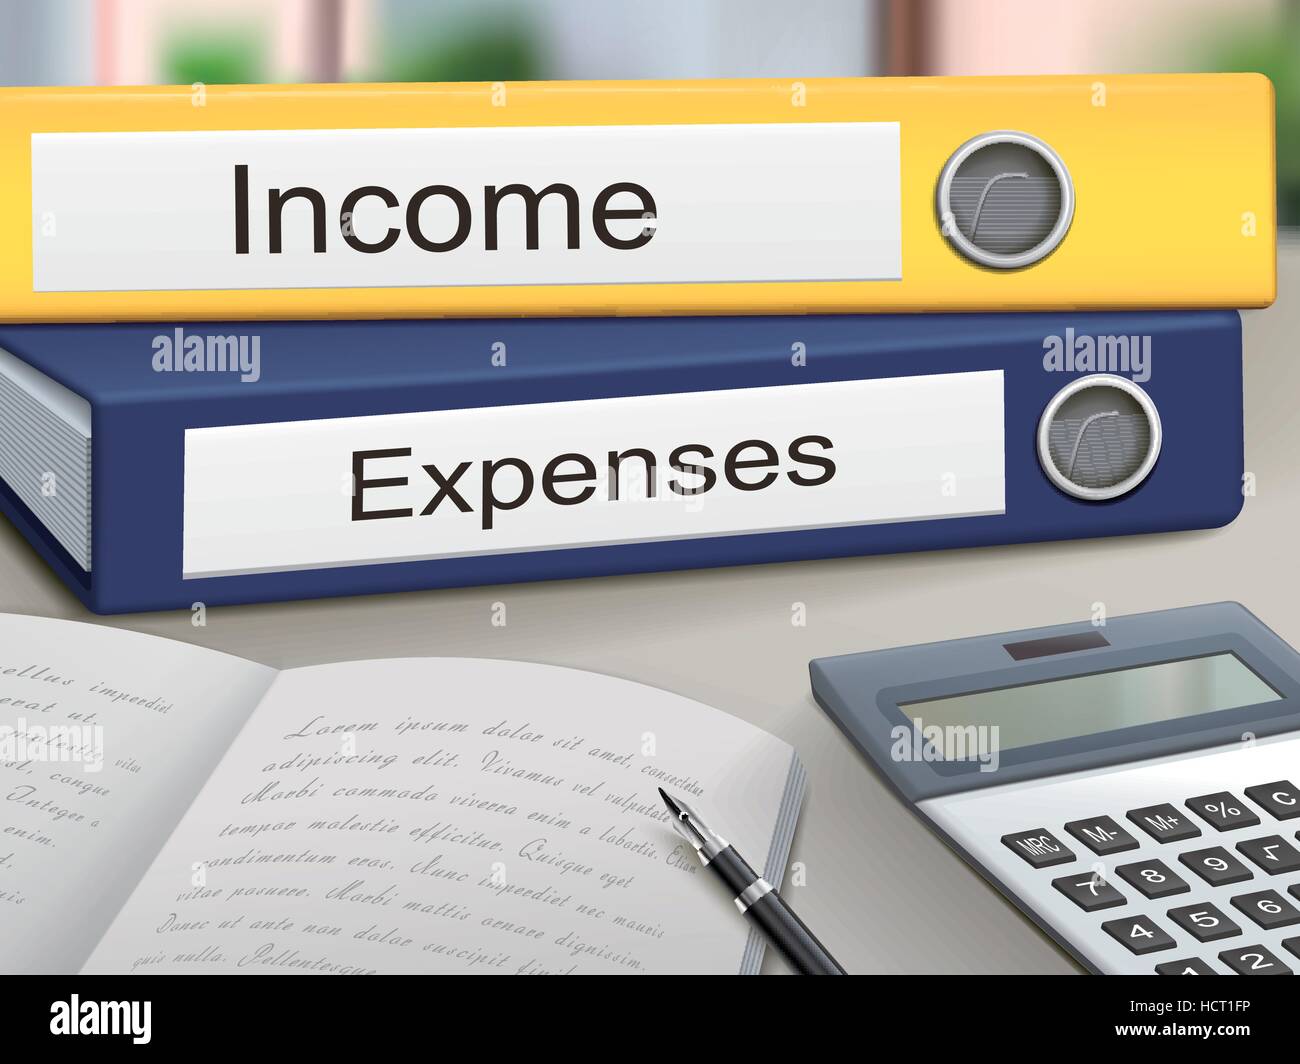 income and expenses binders isolated on the office table Stock Vector